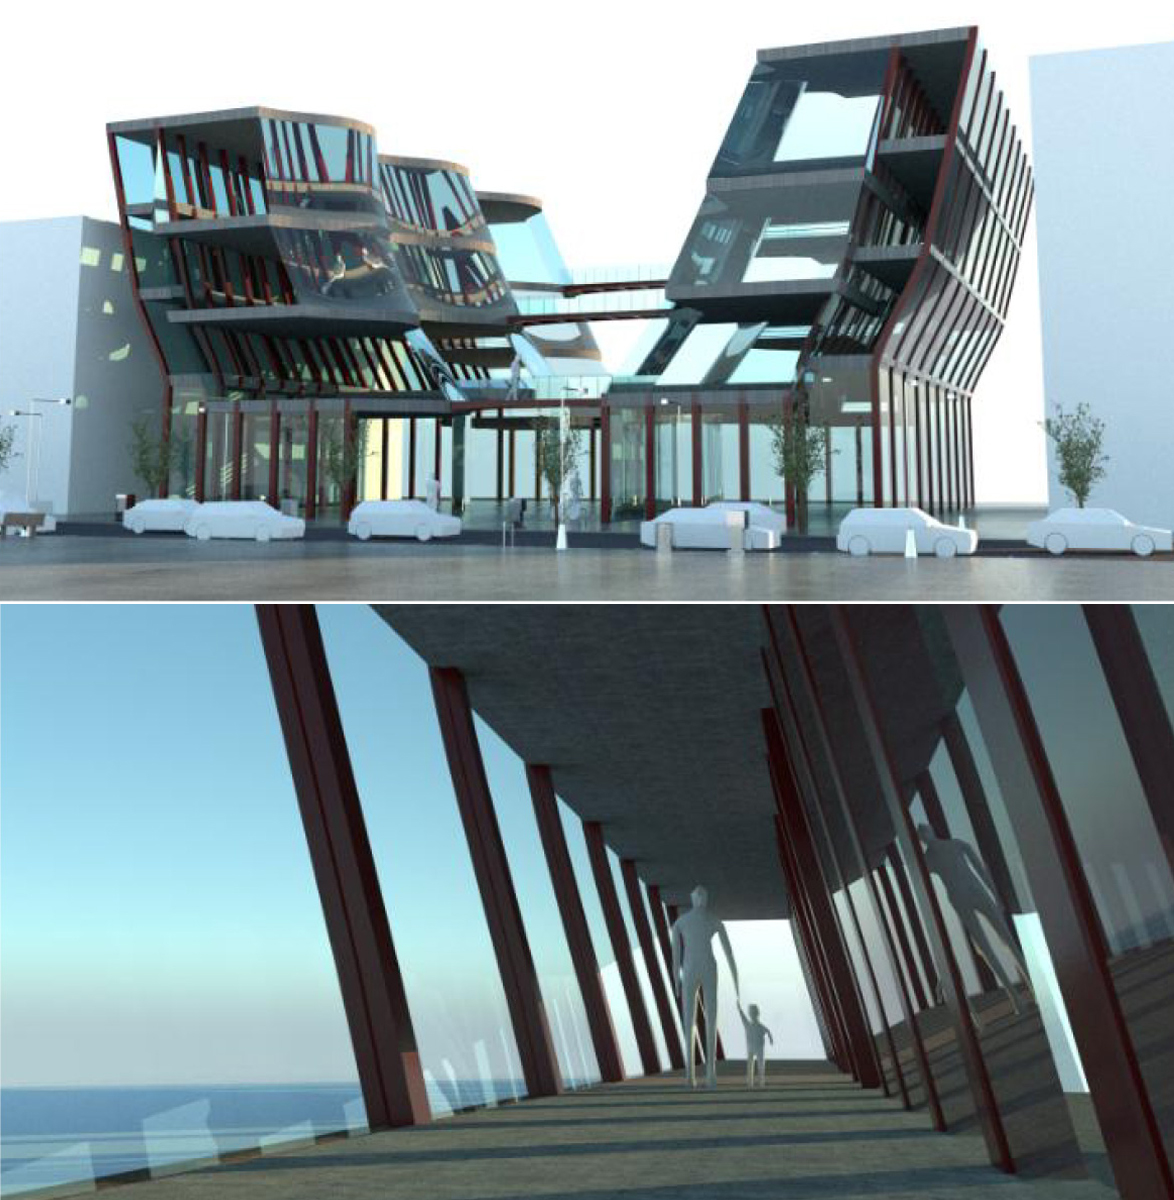 Two digital architectural renderings, one top of another, of a glassy, airy building